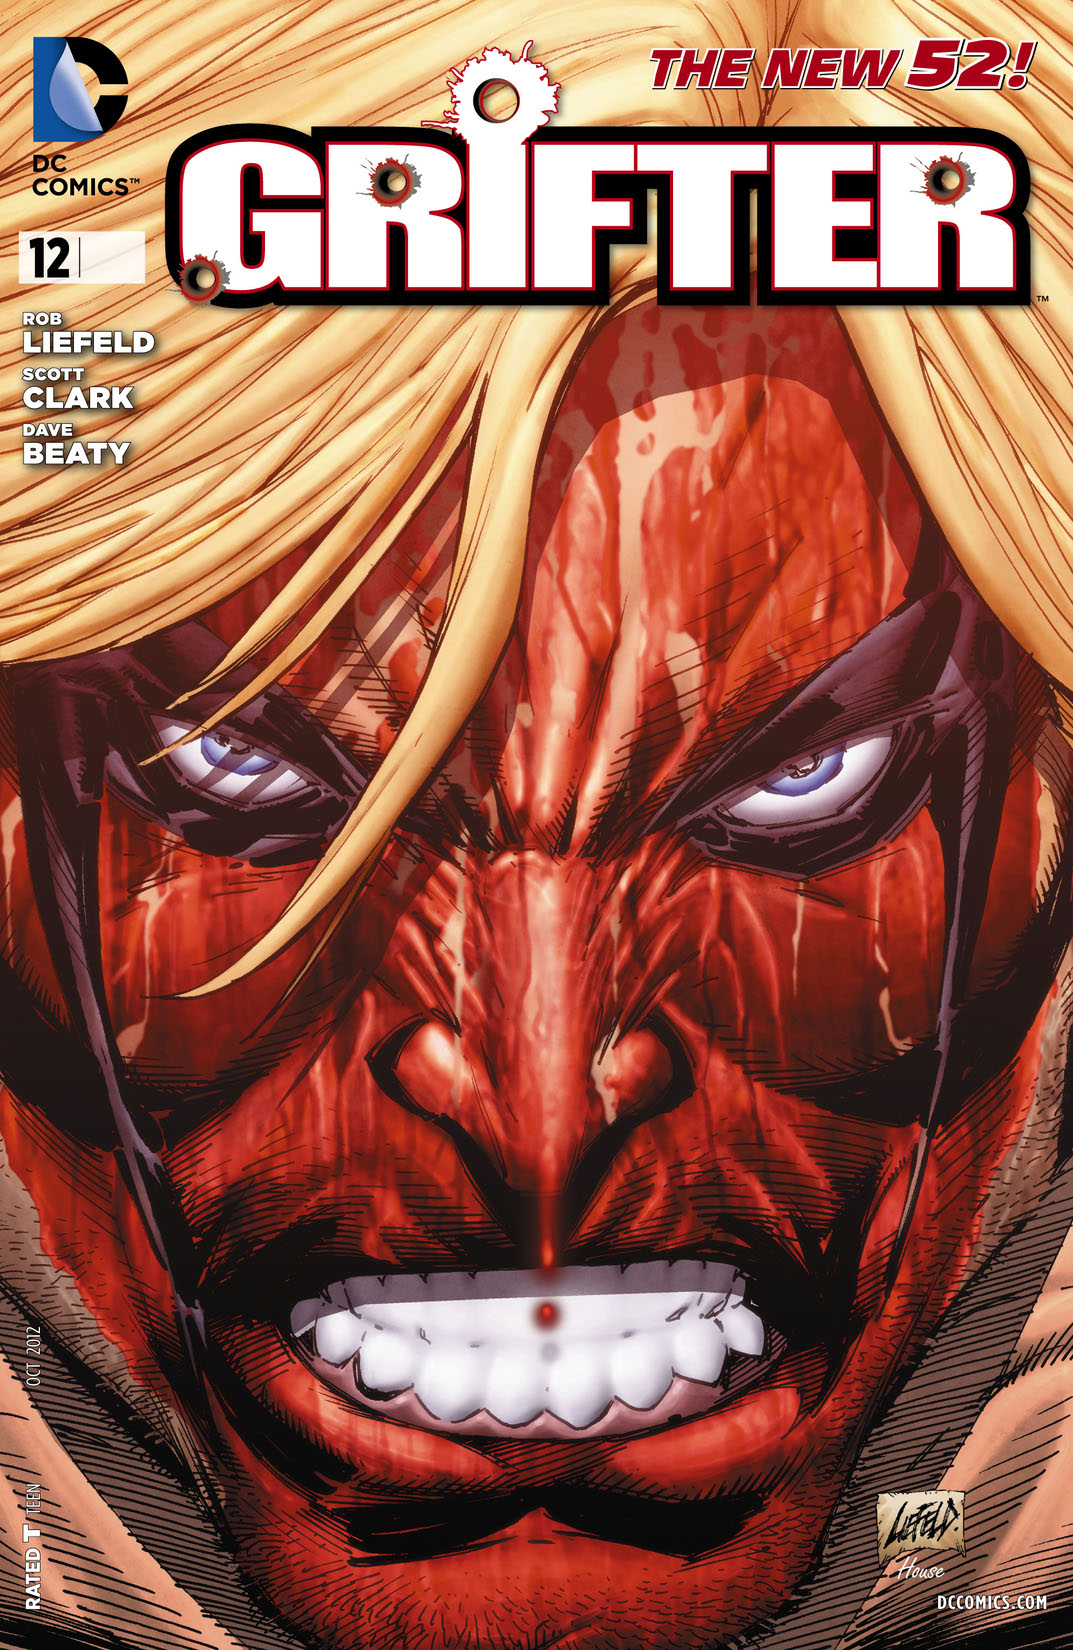 Grifter (2011-2013) #12 preview images